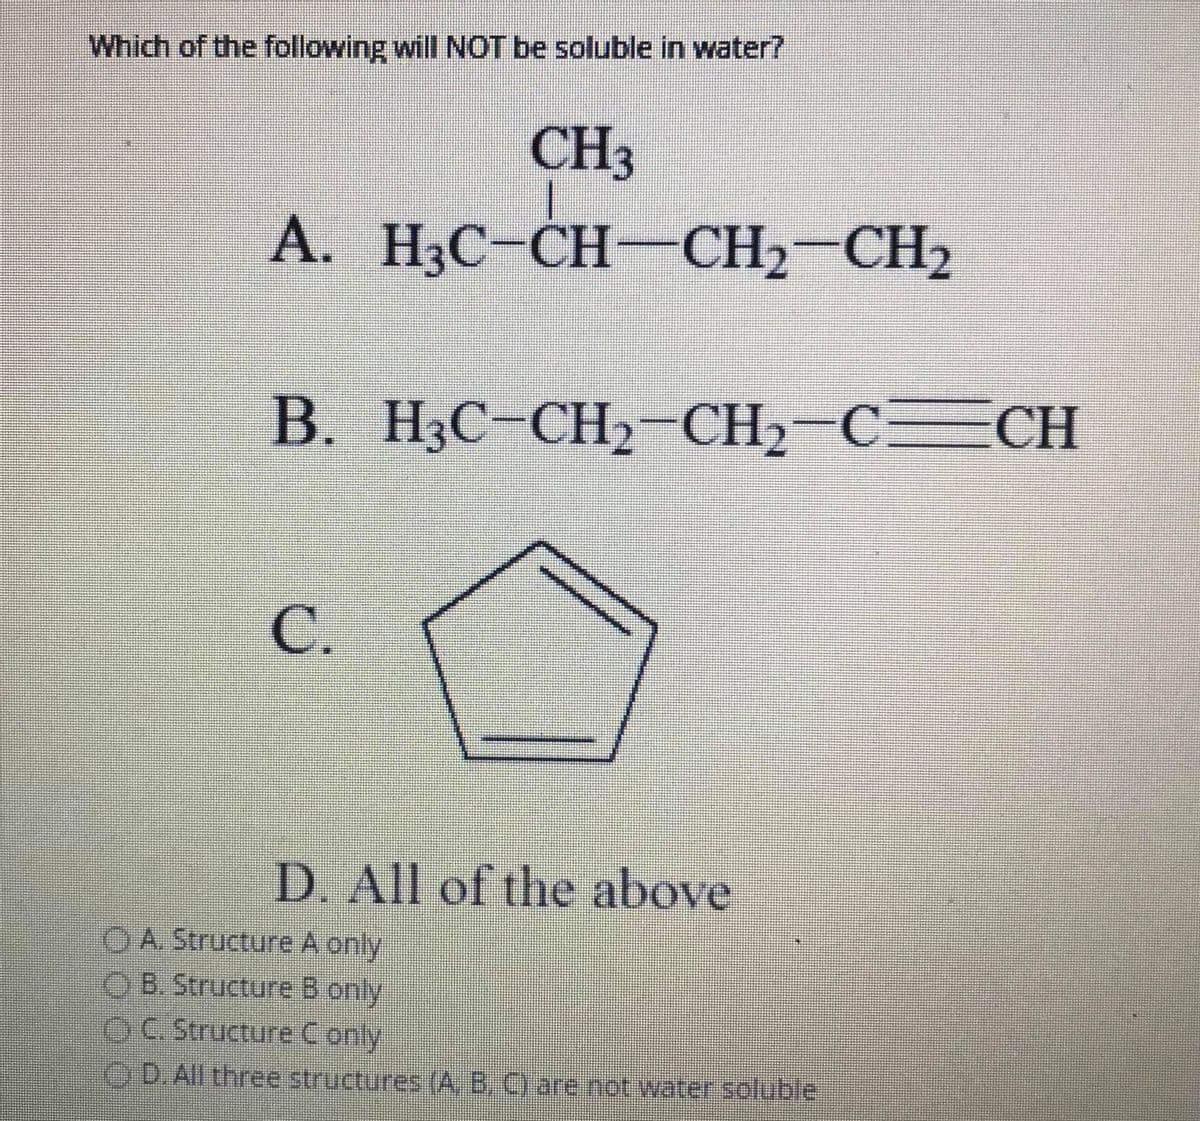 Which of the following will NOT be soluble in water?
CH3
A. H3C-CH-CH2-CH2
В.
H3C-CH2-CH2-
С.
D. All of the above
OA Structure A only
O B. Structure B only
OC.Structure Conly
OD. All three structures (A, B, C) are not water soluble
